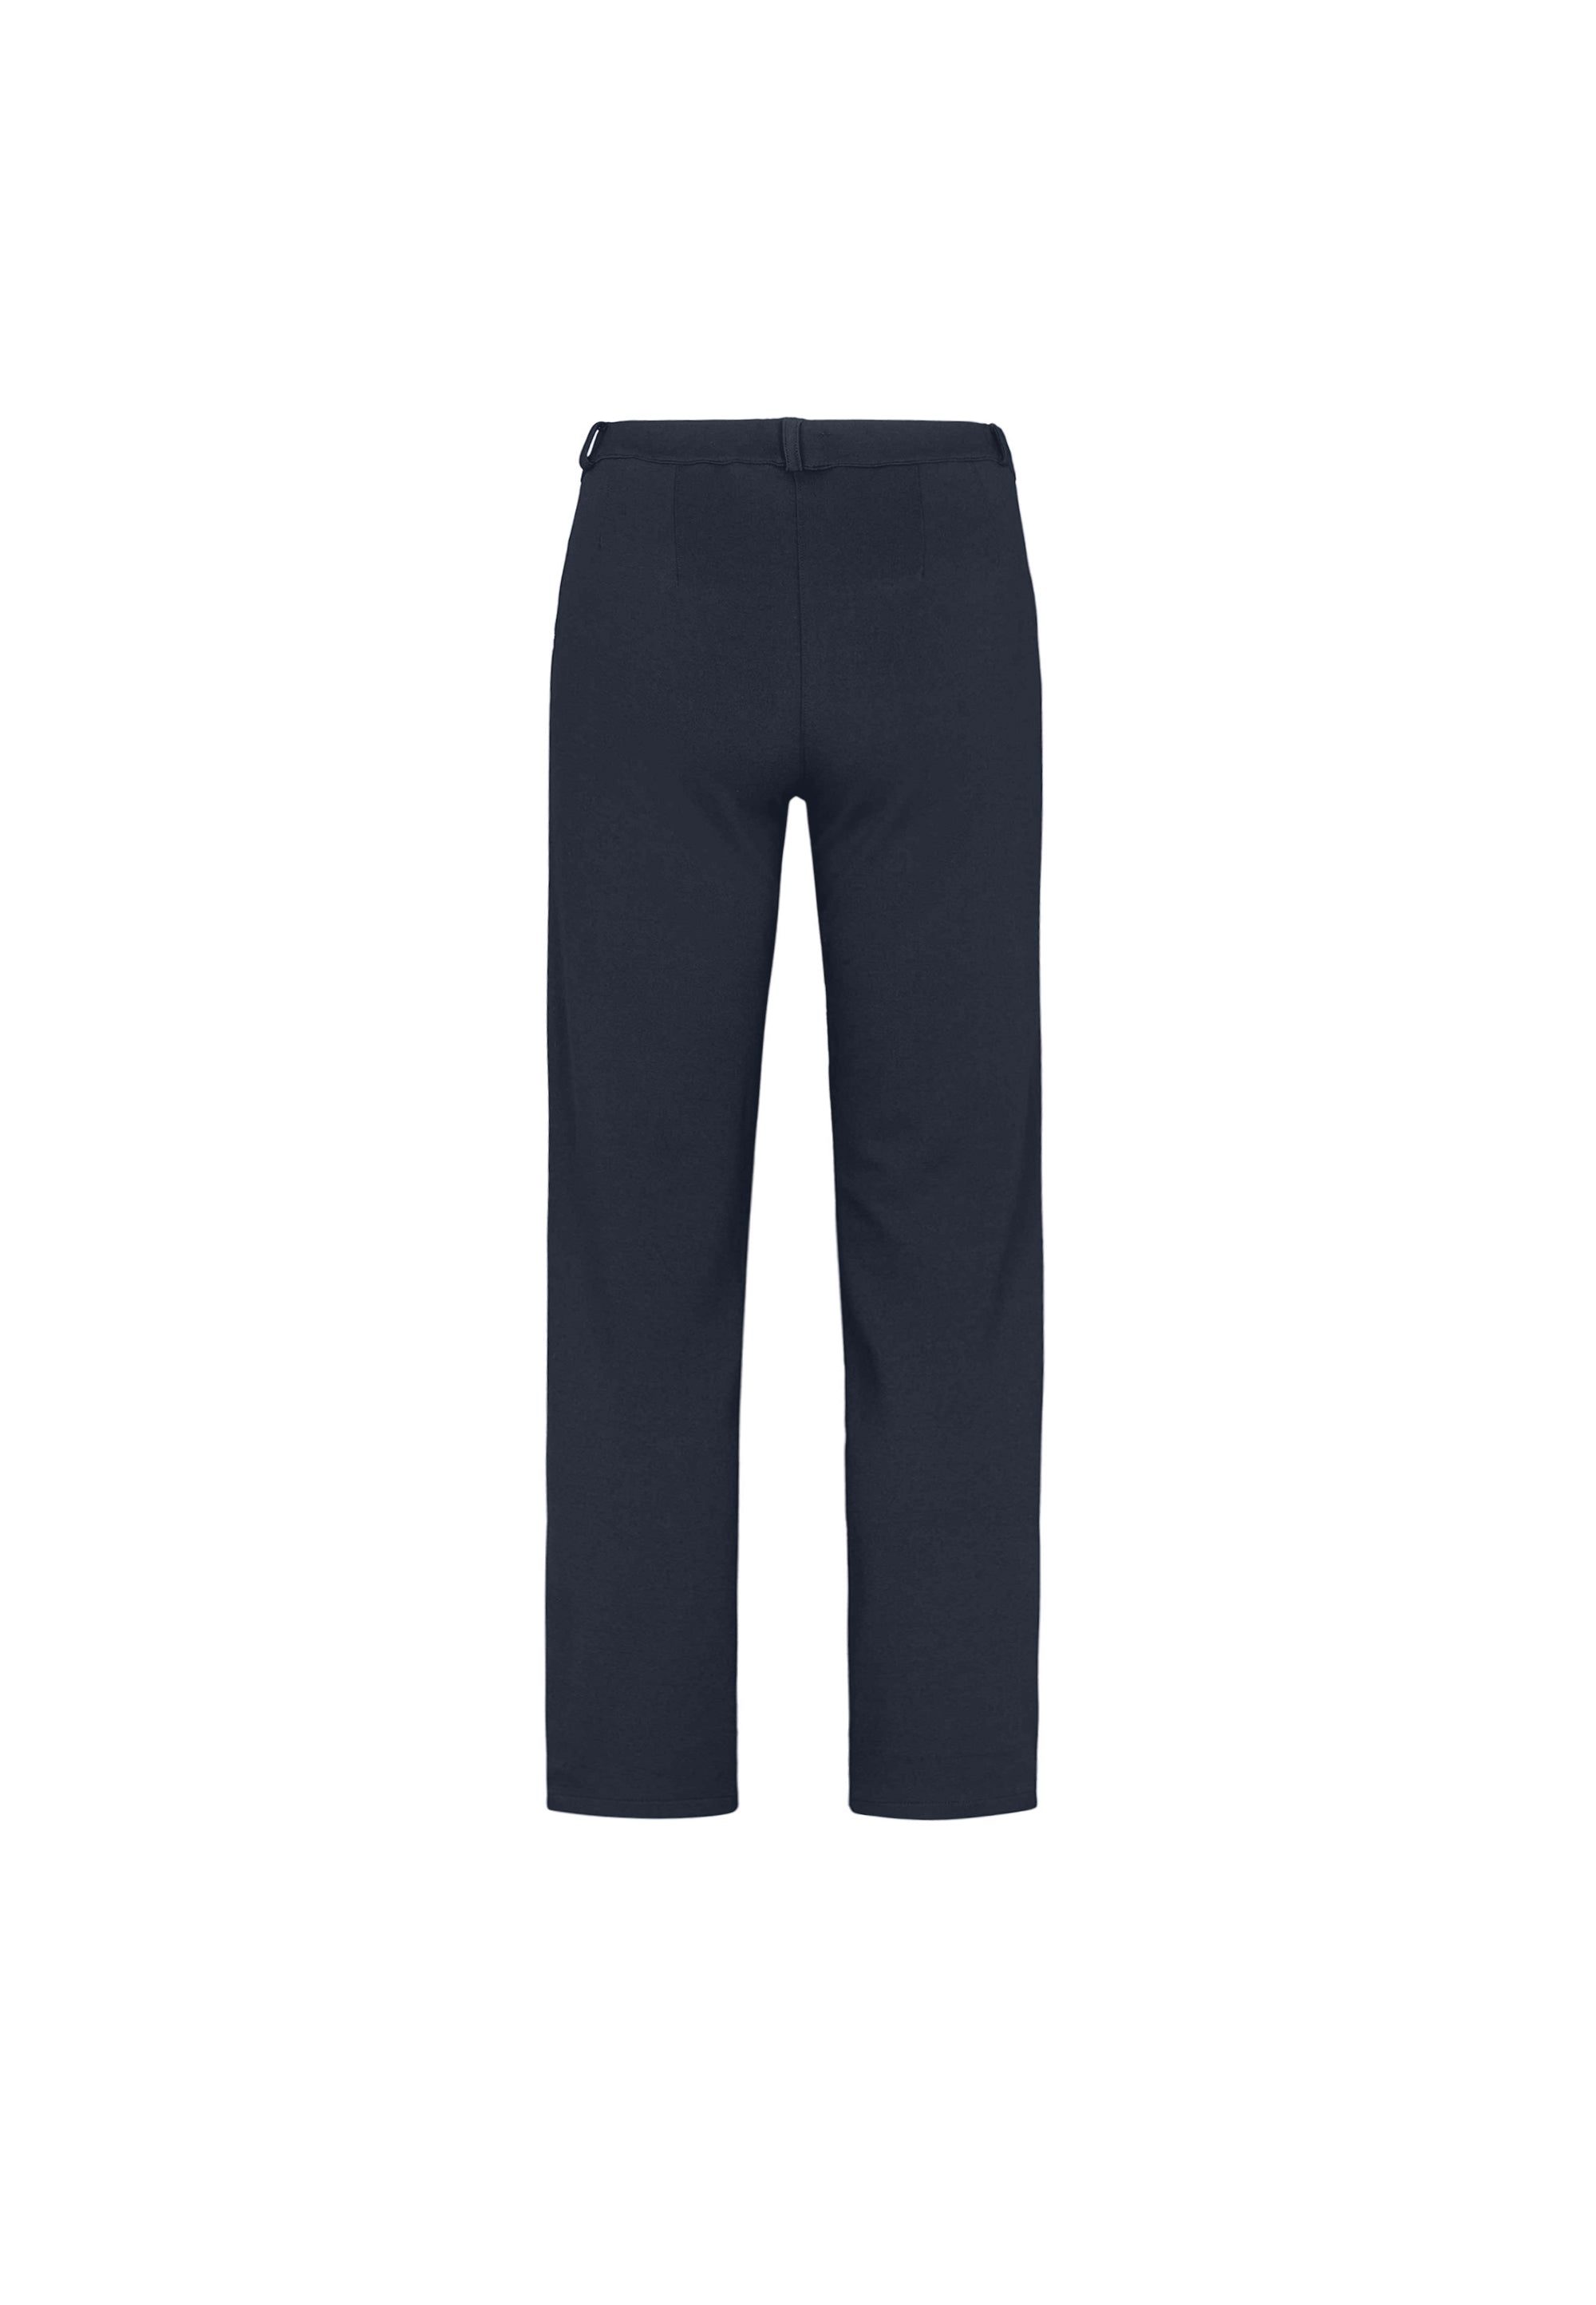 LAURIE  Ruby Straight - Medium Length Trousers STRAIGHT 49103 Navy brushed